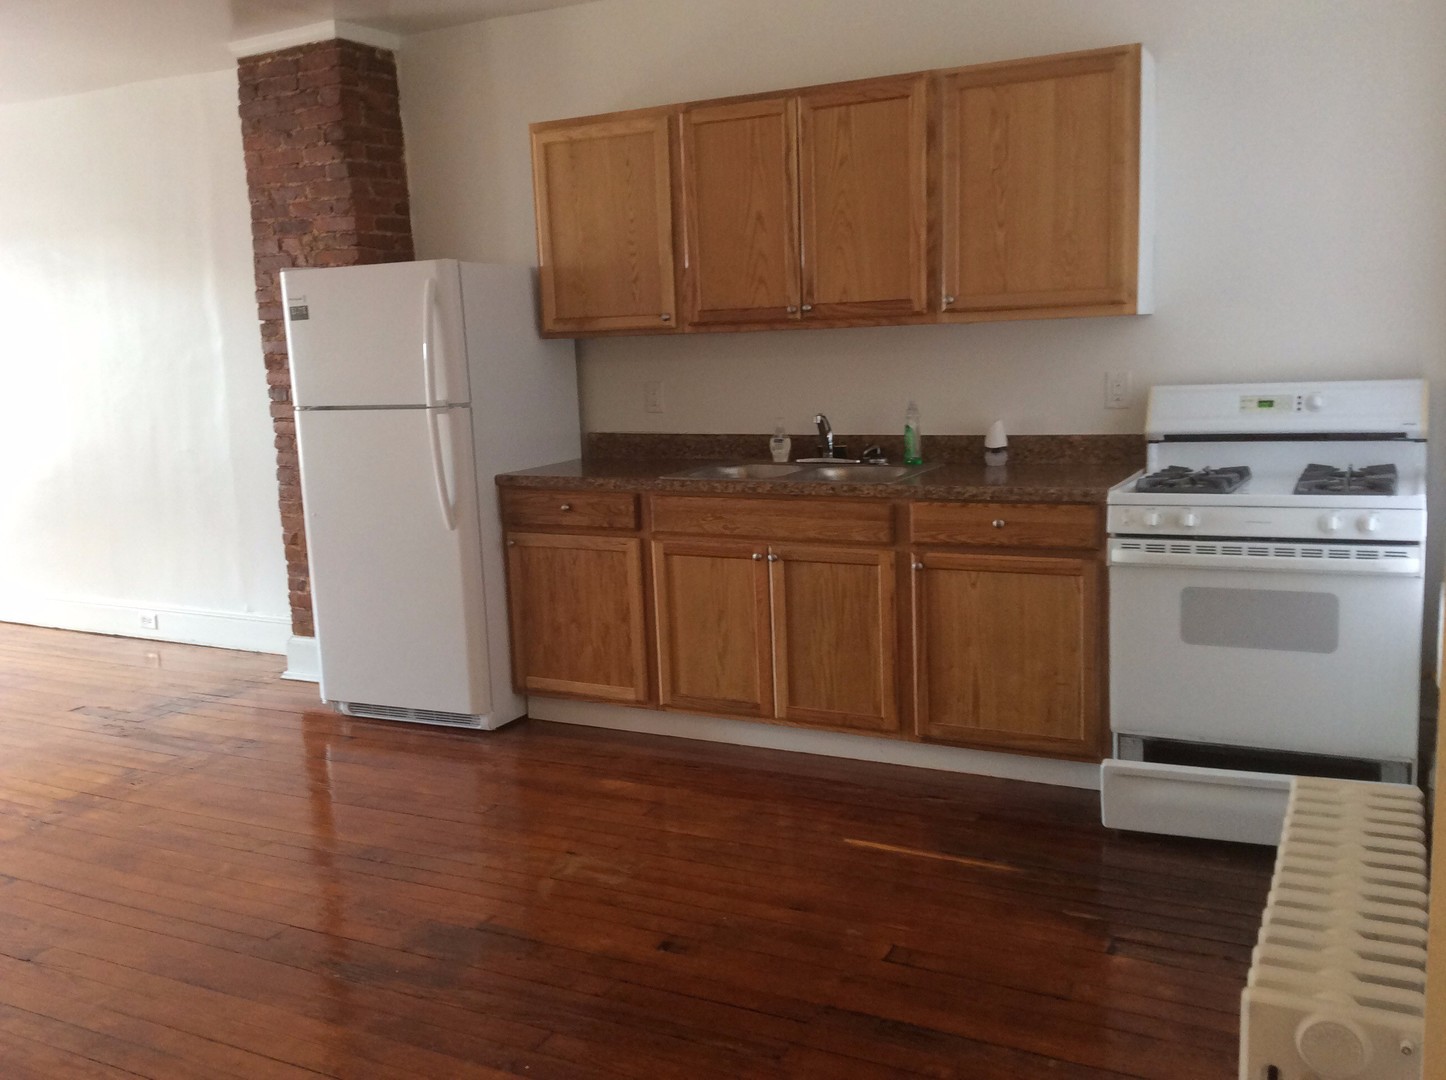 3 bedroom apartment in York City SD